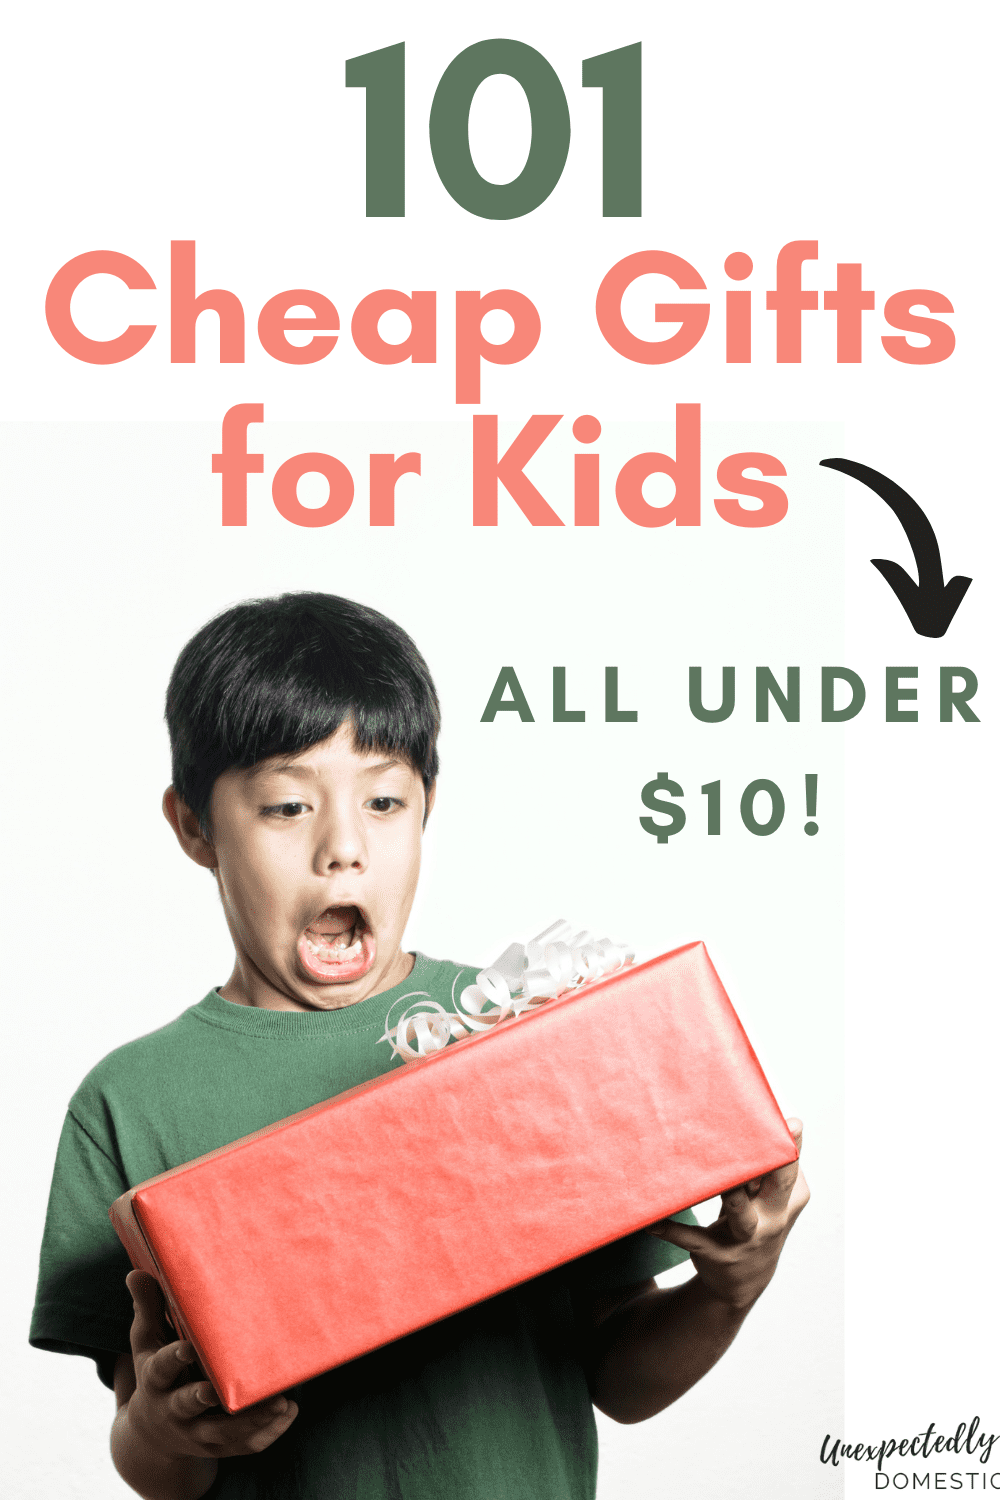 50 MORE Awesome Cheap Kid's Gifts that Cost $10 or Less - Thrifty Frugal Mom